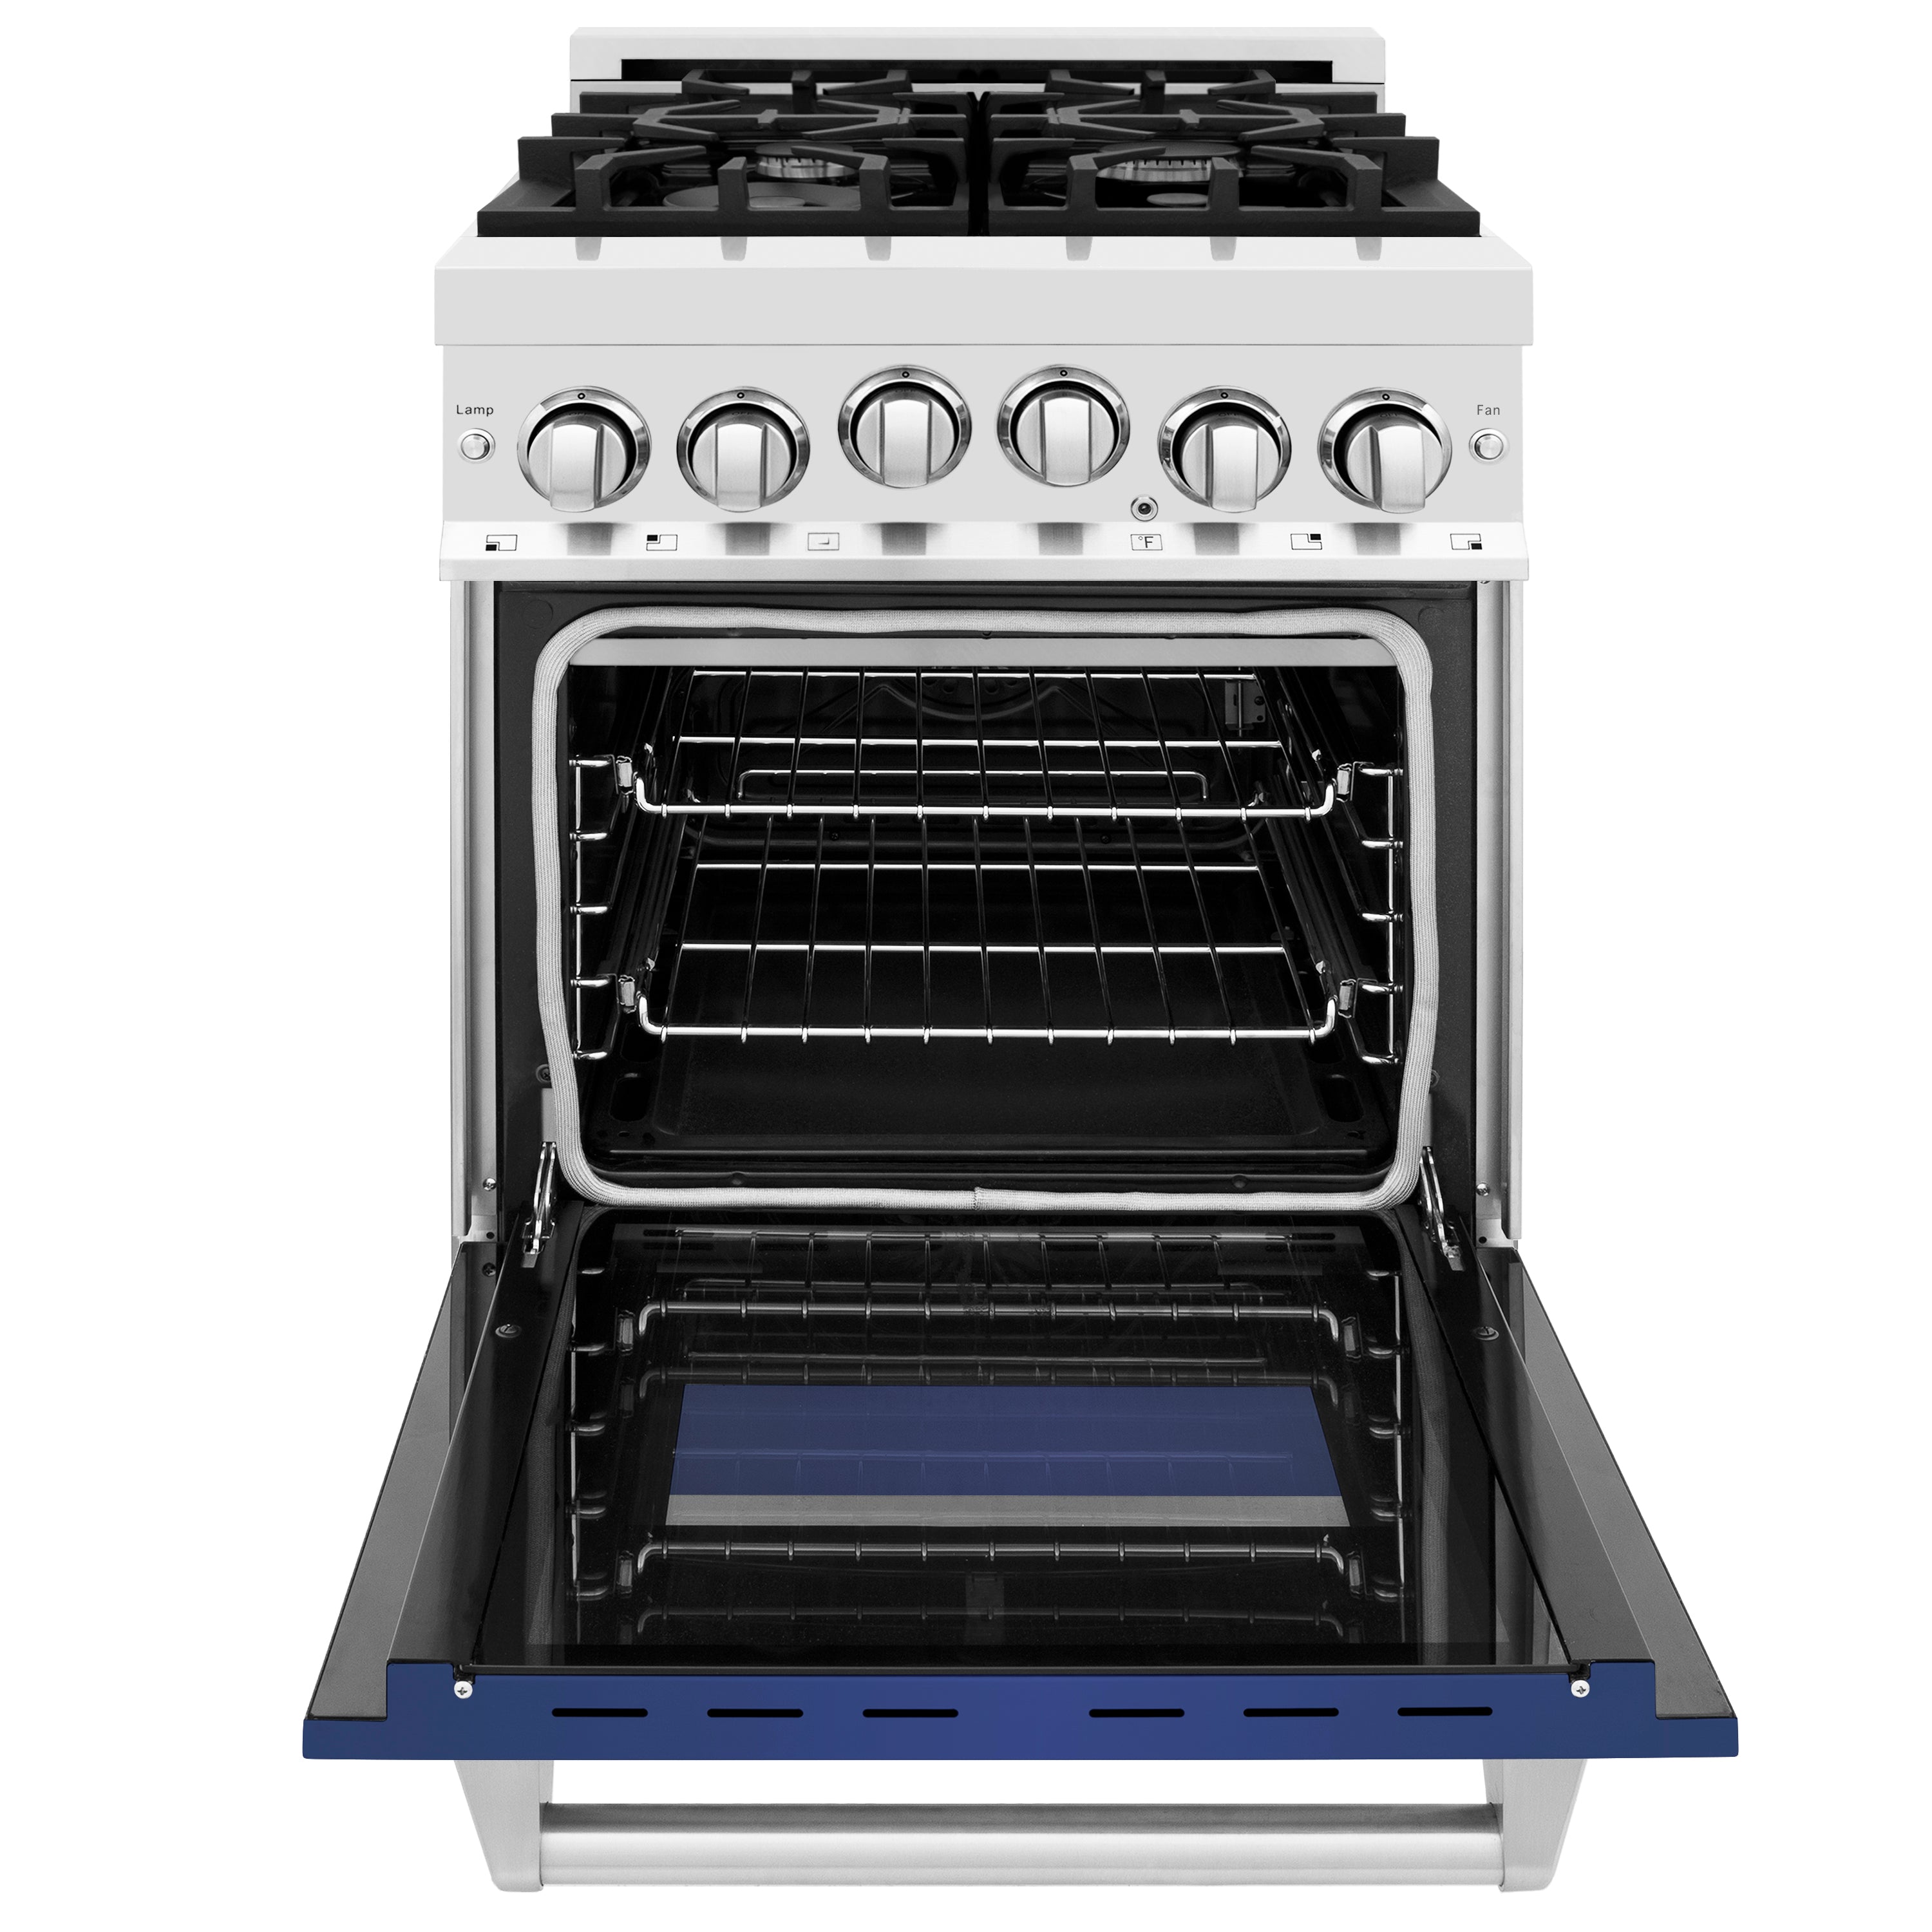 ZLINE 24" 2.8 cu. ft. Range with Gas Stove and Gas Oven in Stainless Steel and Blue Matte Door (RG-BM-24)